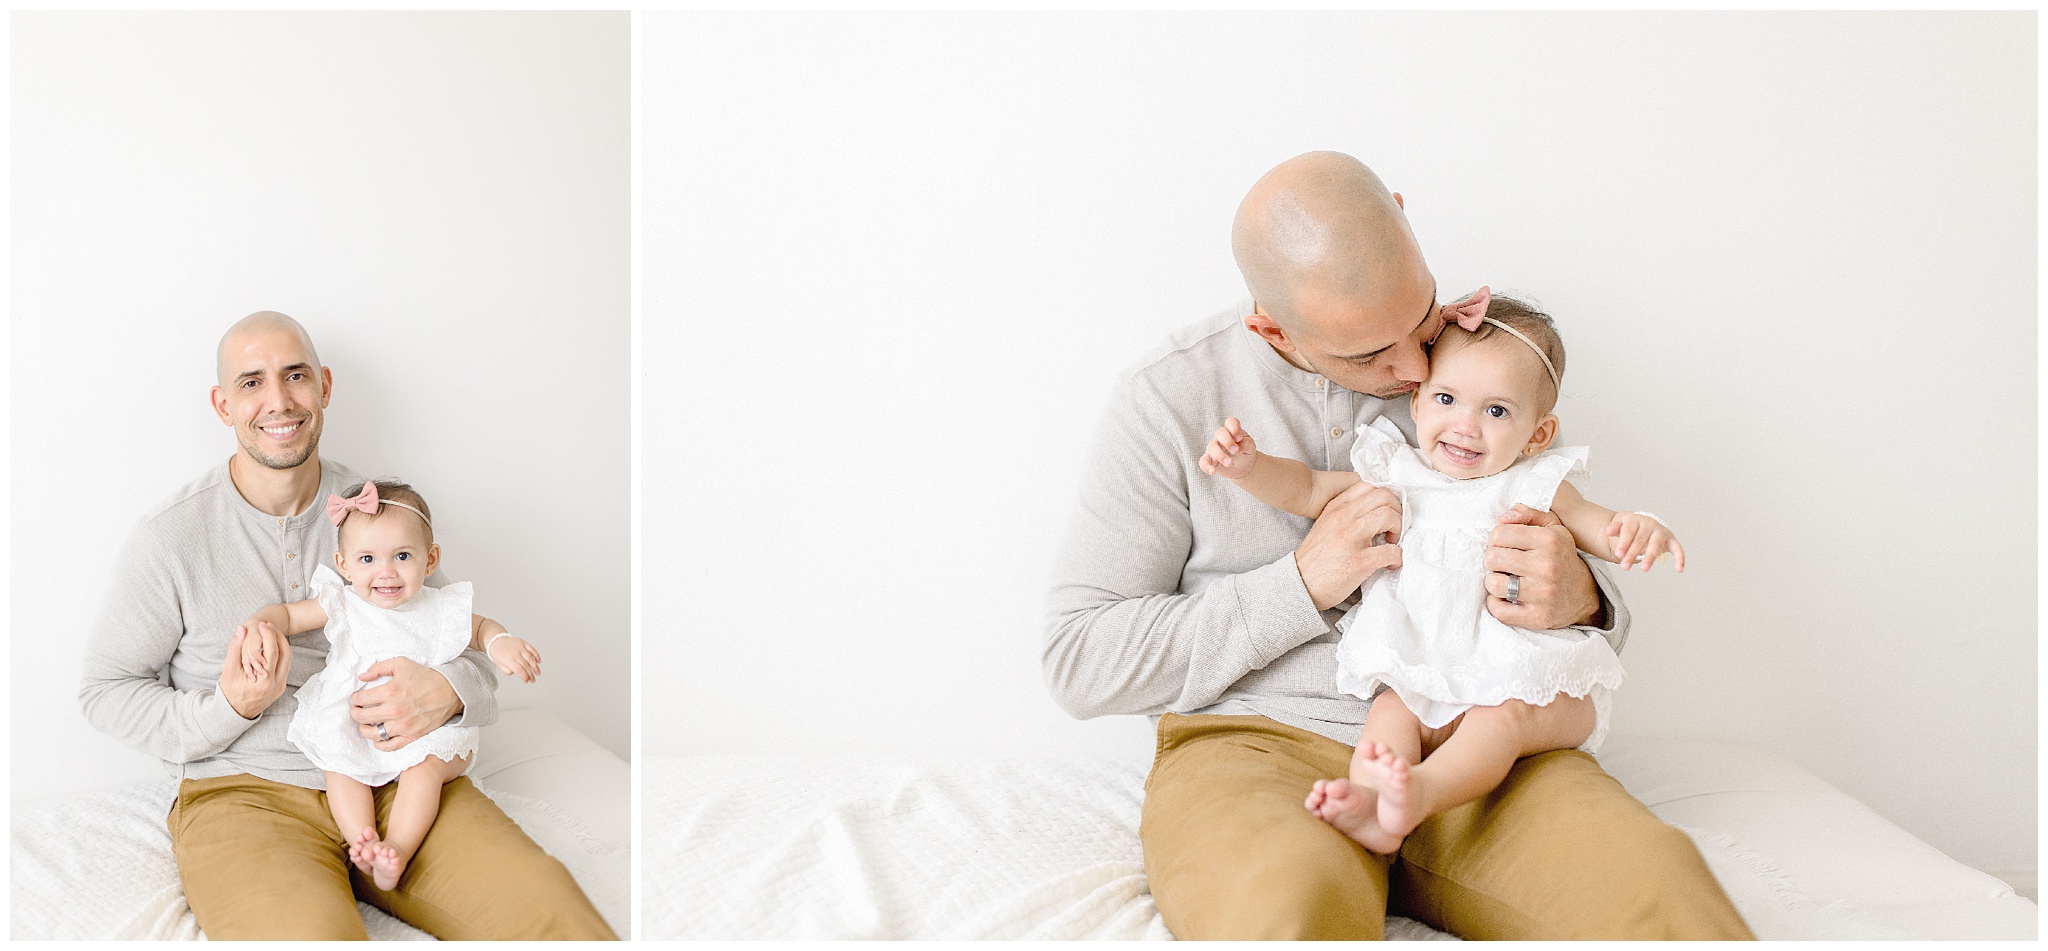 Dad smiles with daughter. Photos by Ivanna Vidal Photography.